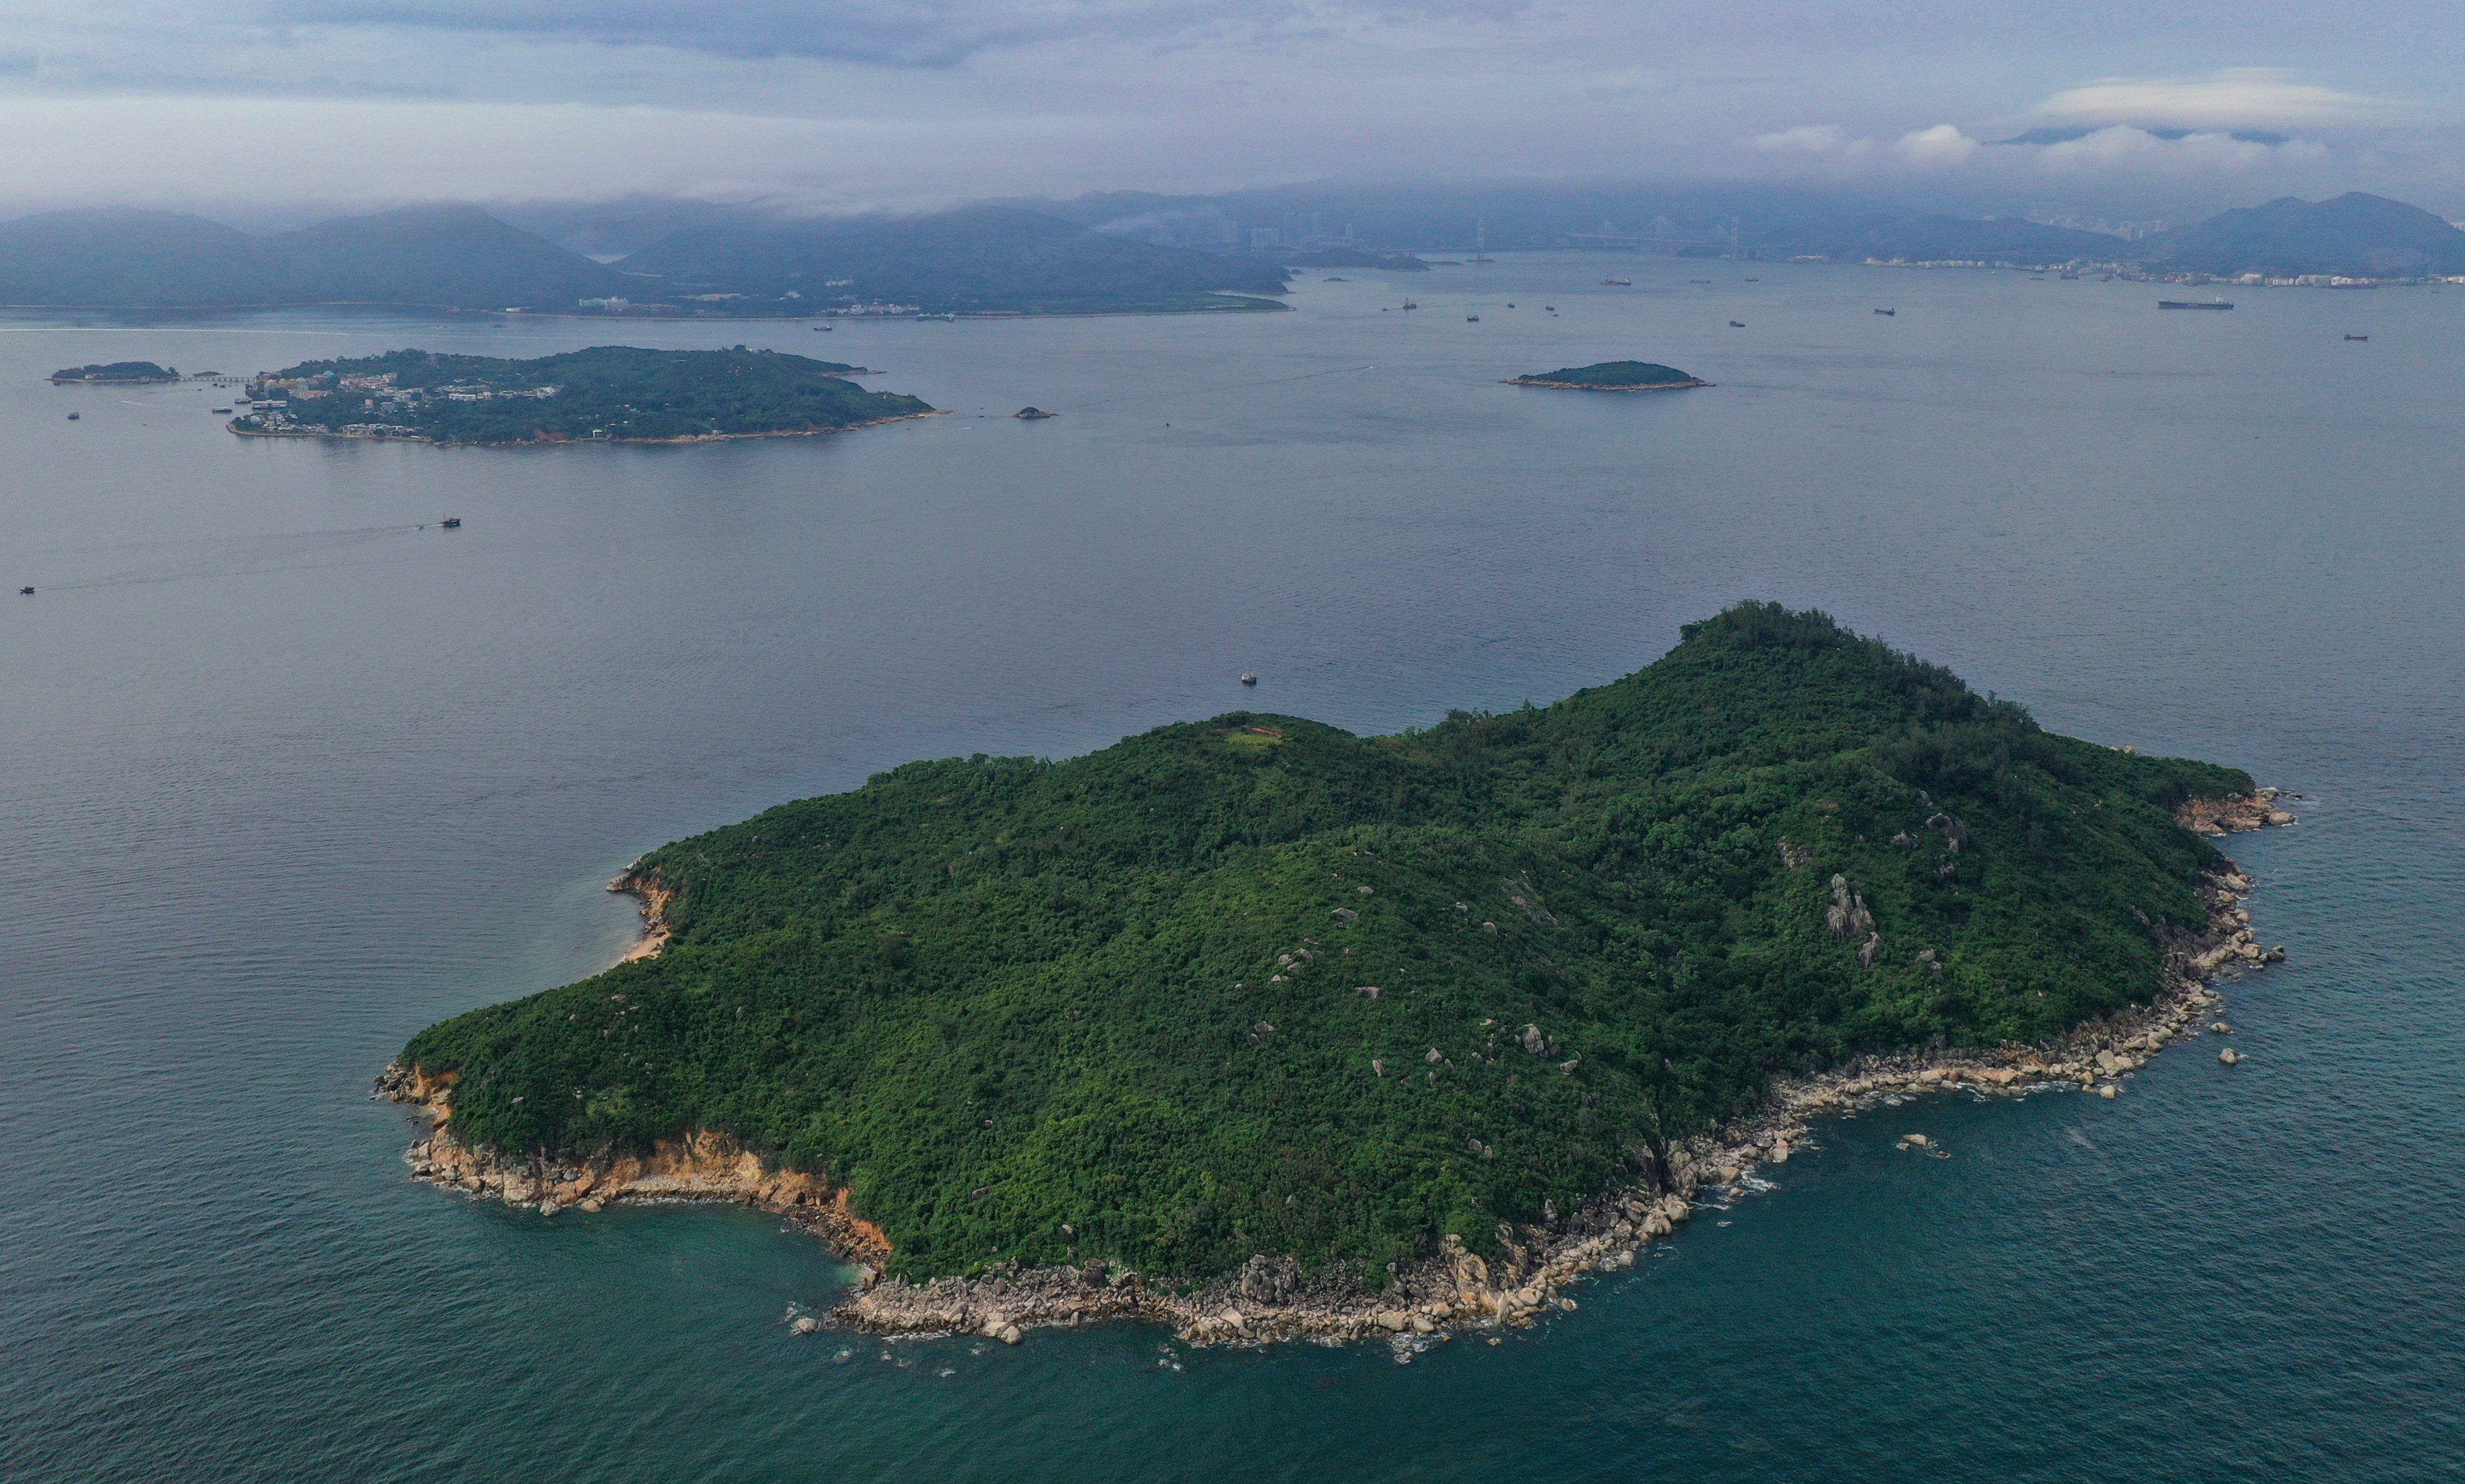 Part of the area planned to be used for the Lantau Tomorrow Vision project. The city’s ambitious plan is to create a new metropolis on man-made islands in waters off Lantau. Photo: Martin Chan